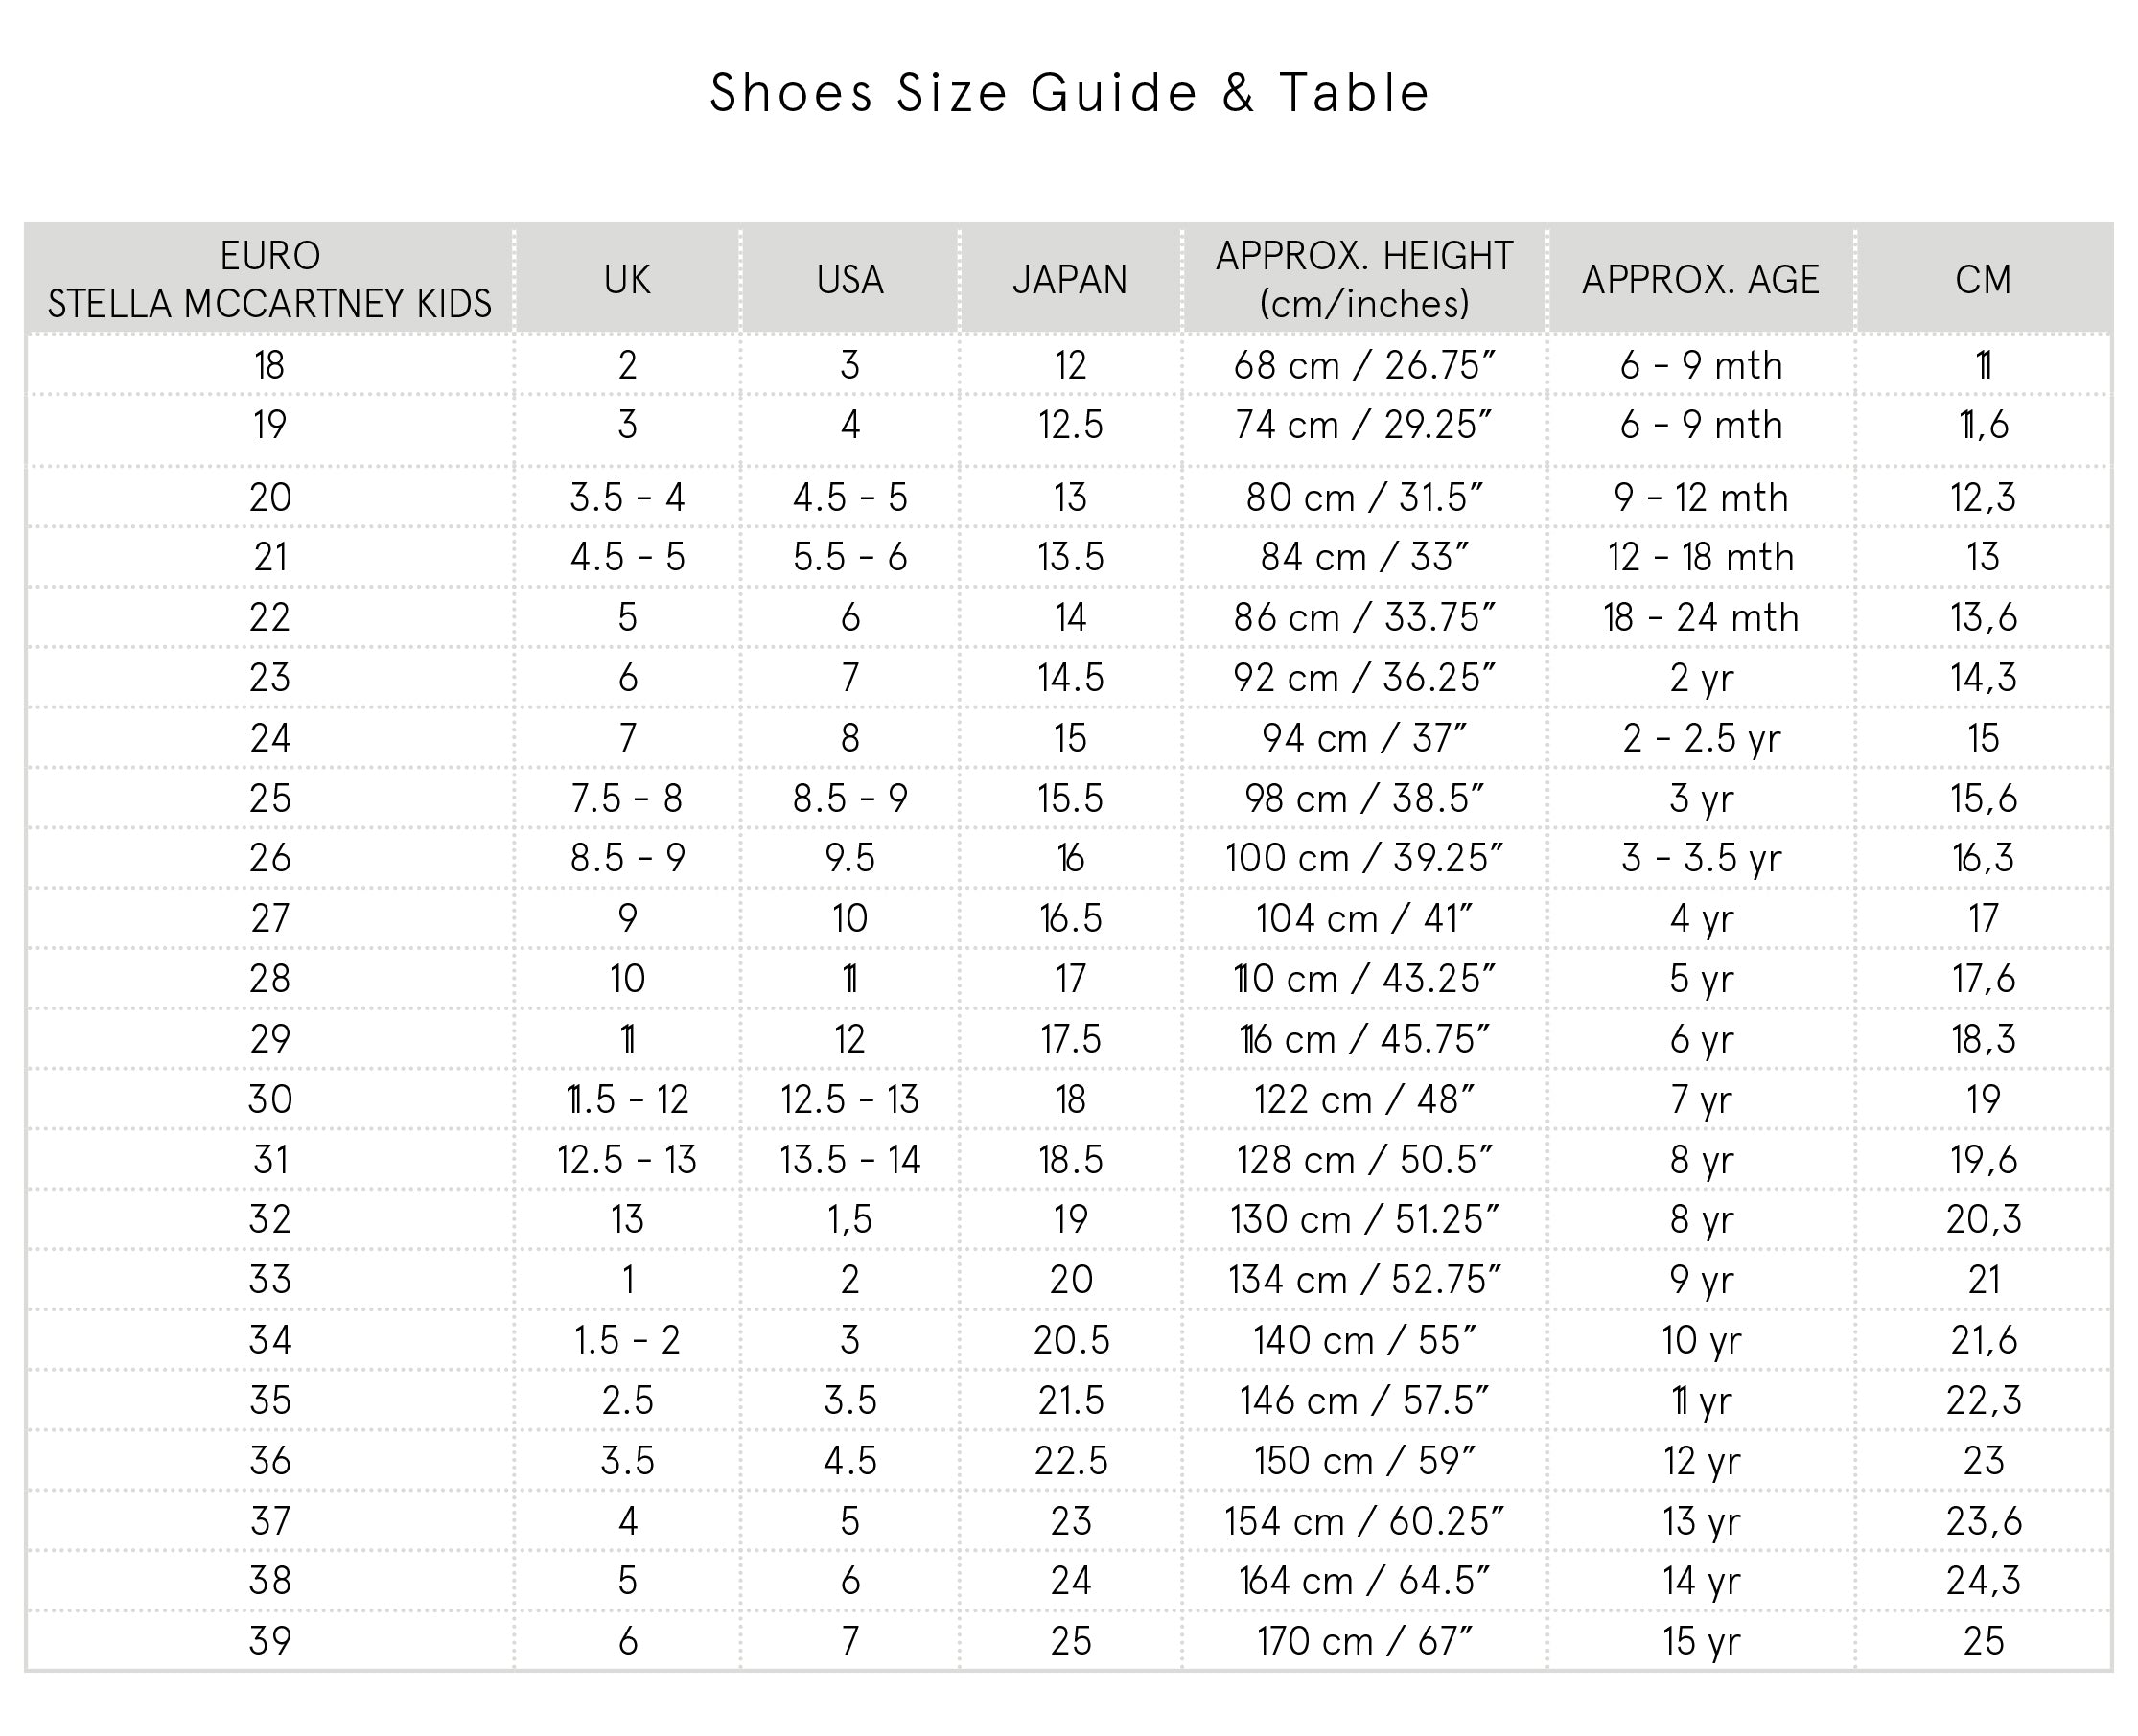 Shoes Size Guide